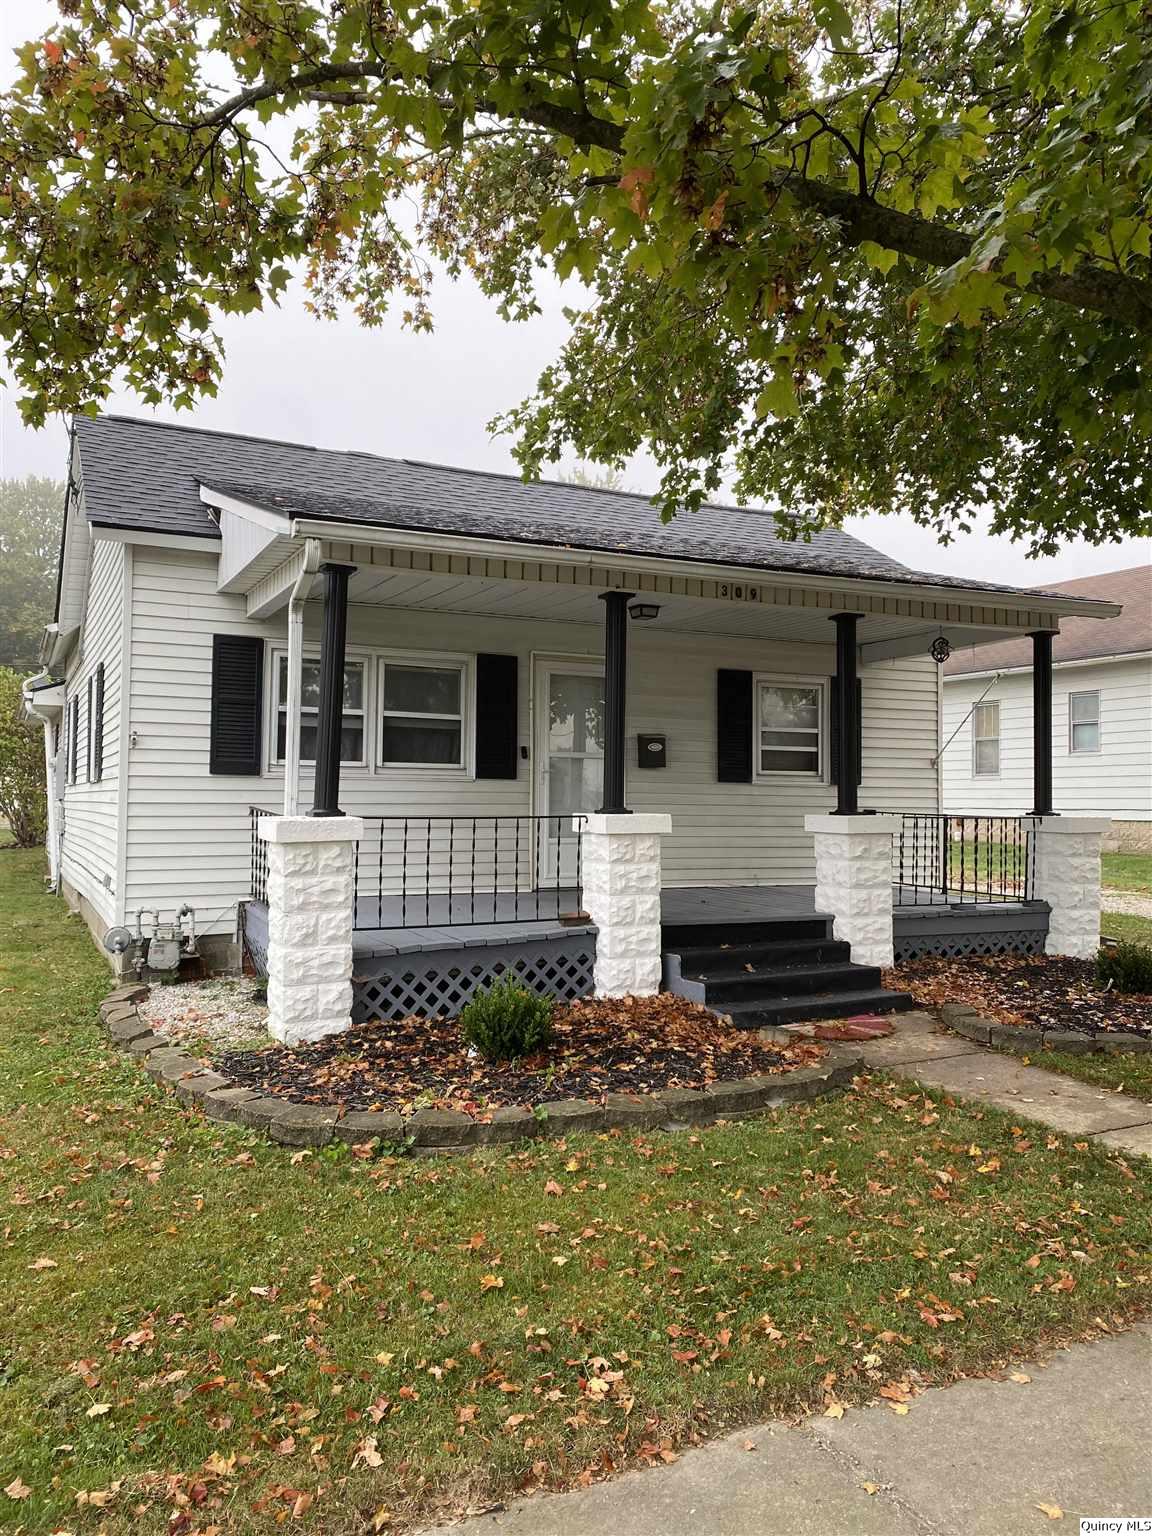 309 W Main, Mt. Sterling, Illinois 62353, 2 Bedrooms Bedrooms, ,1 BathroomBathrooms,Residential,For Sale,309 W Main,203017